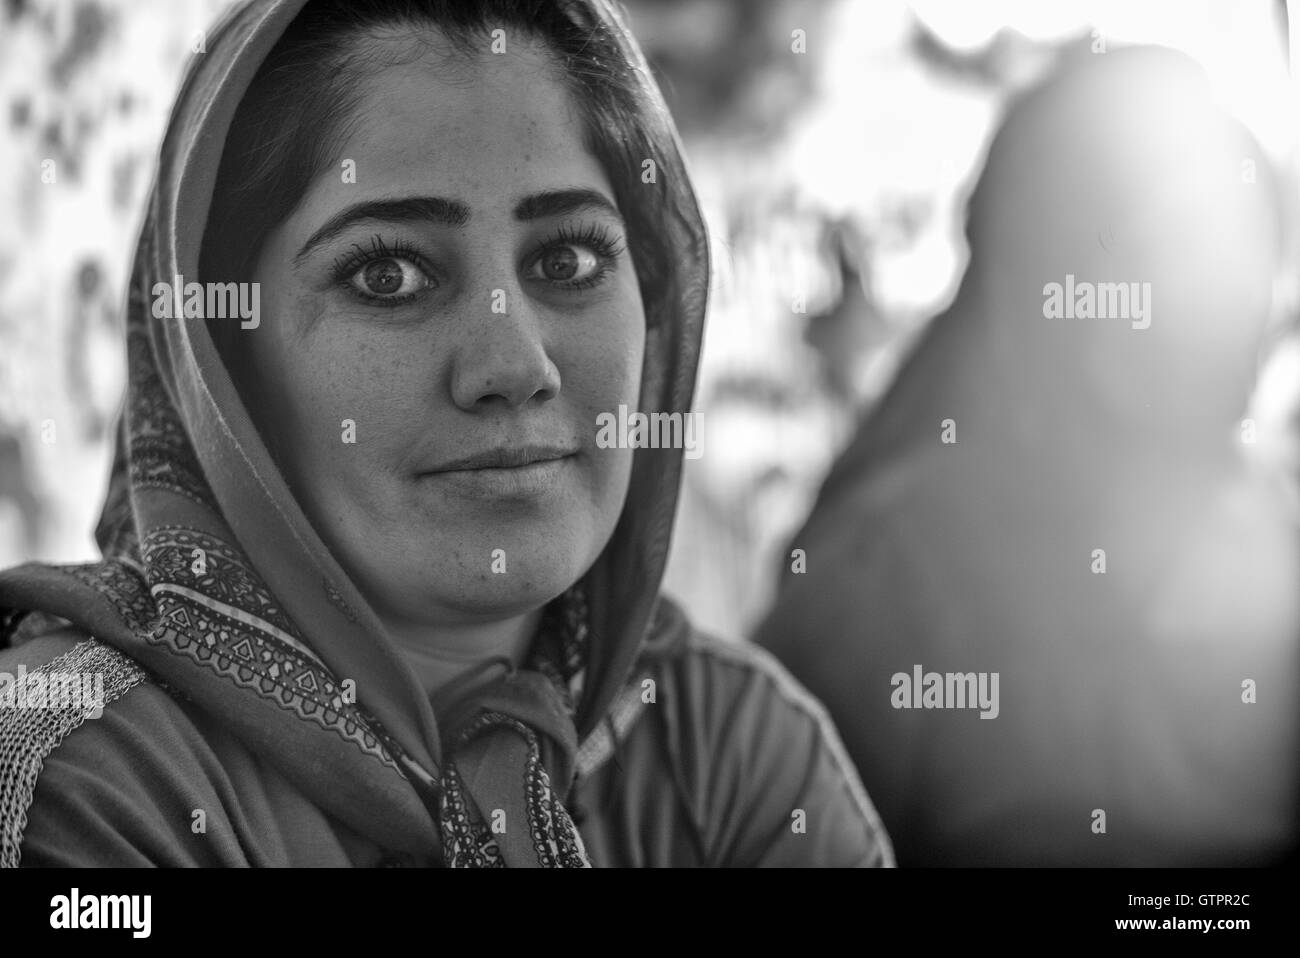 A nomadic Qashqai family living in a tent in Fars Province, Iran.  Daughter Azar, age 23. Stock Photo